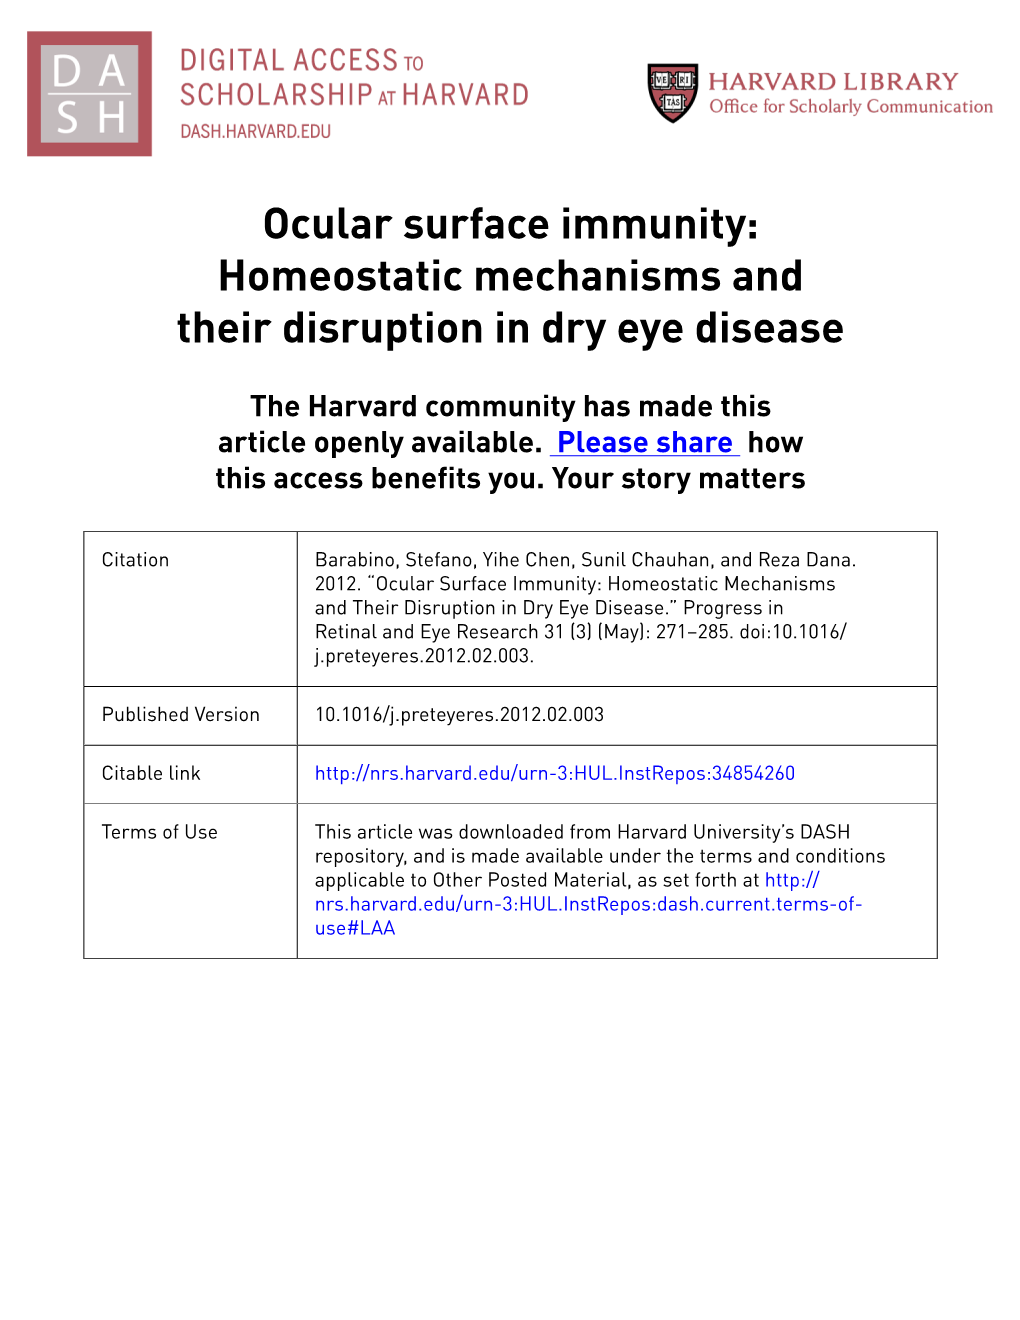 Ocular Surface Immunity: Homeostatic Mechanisms and Their Disruption in Dry Eye Disease